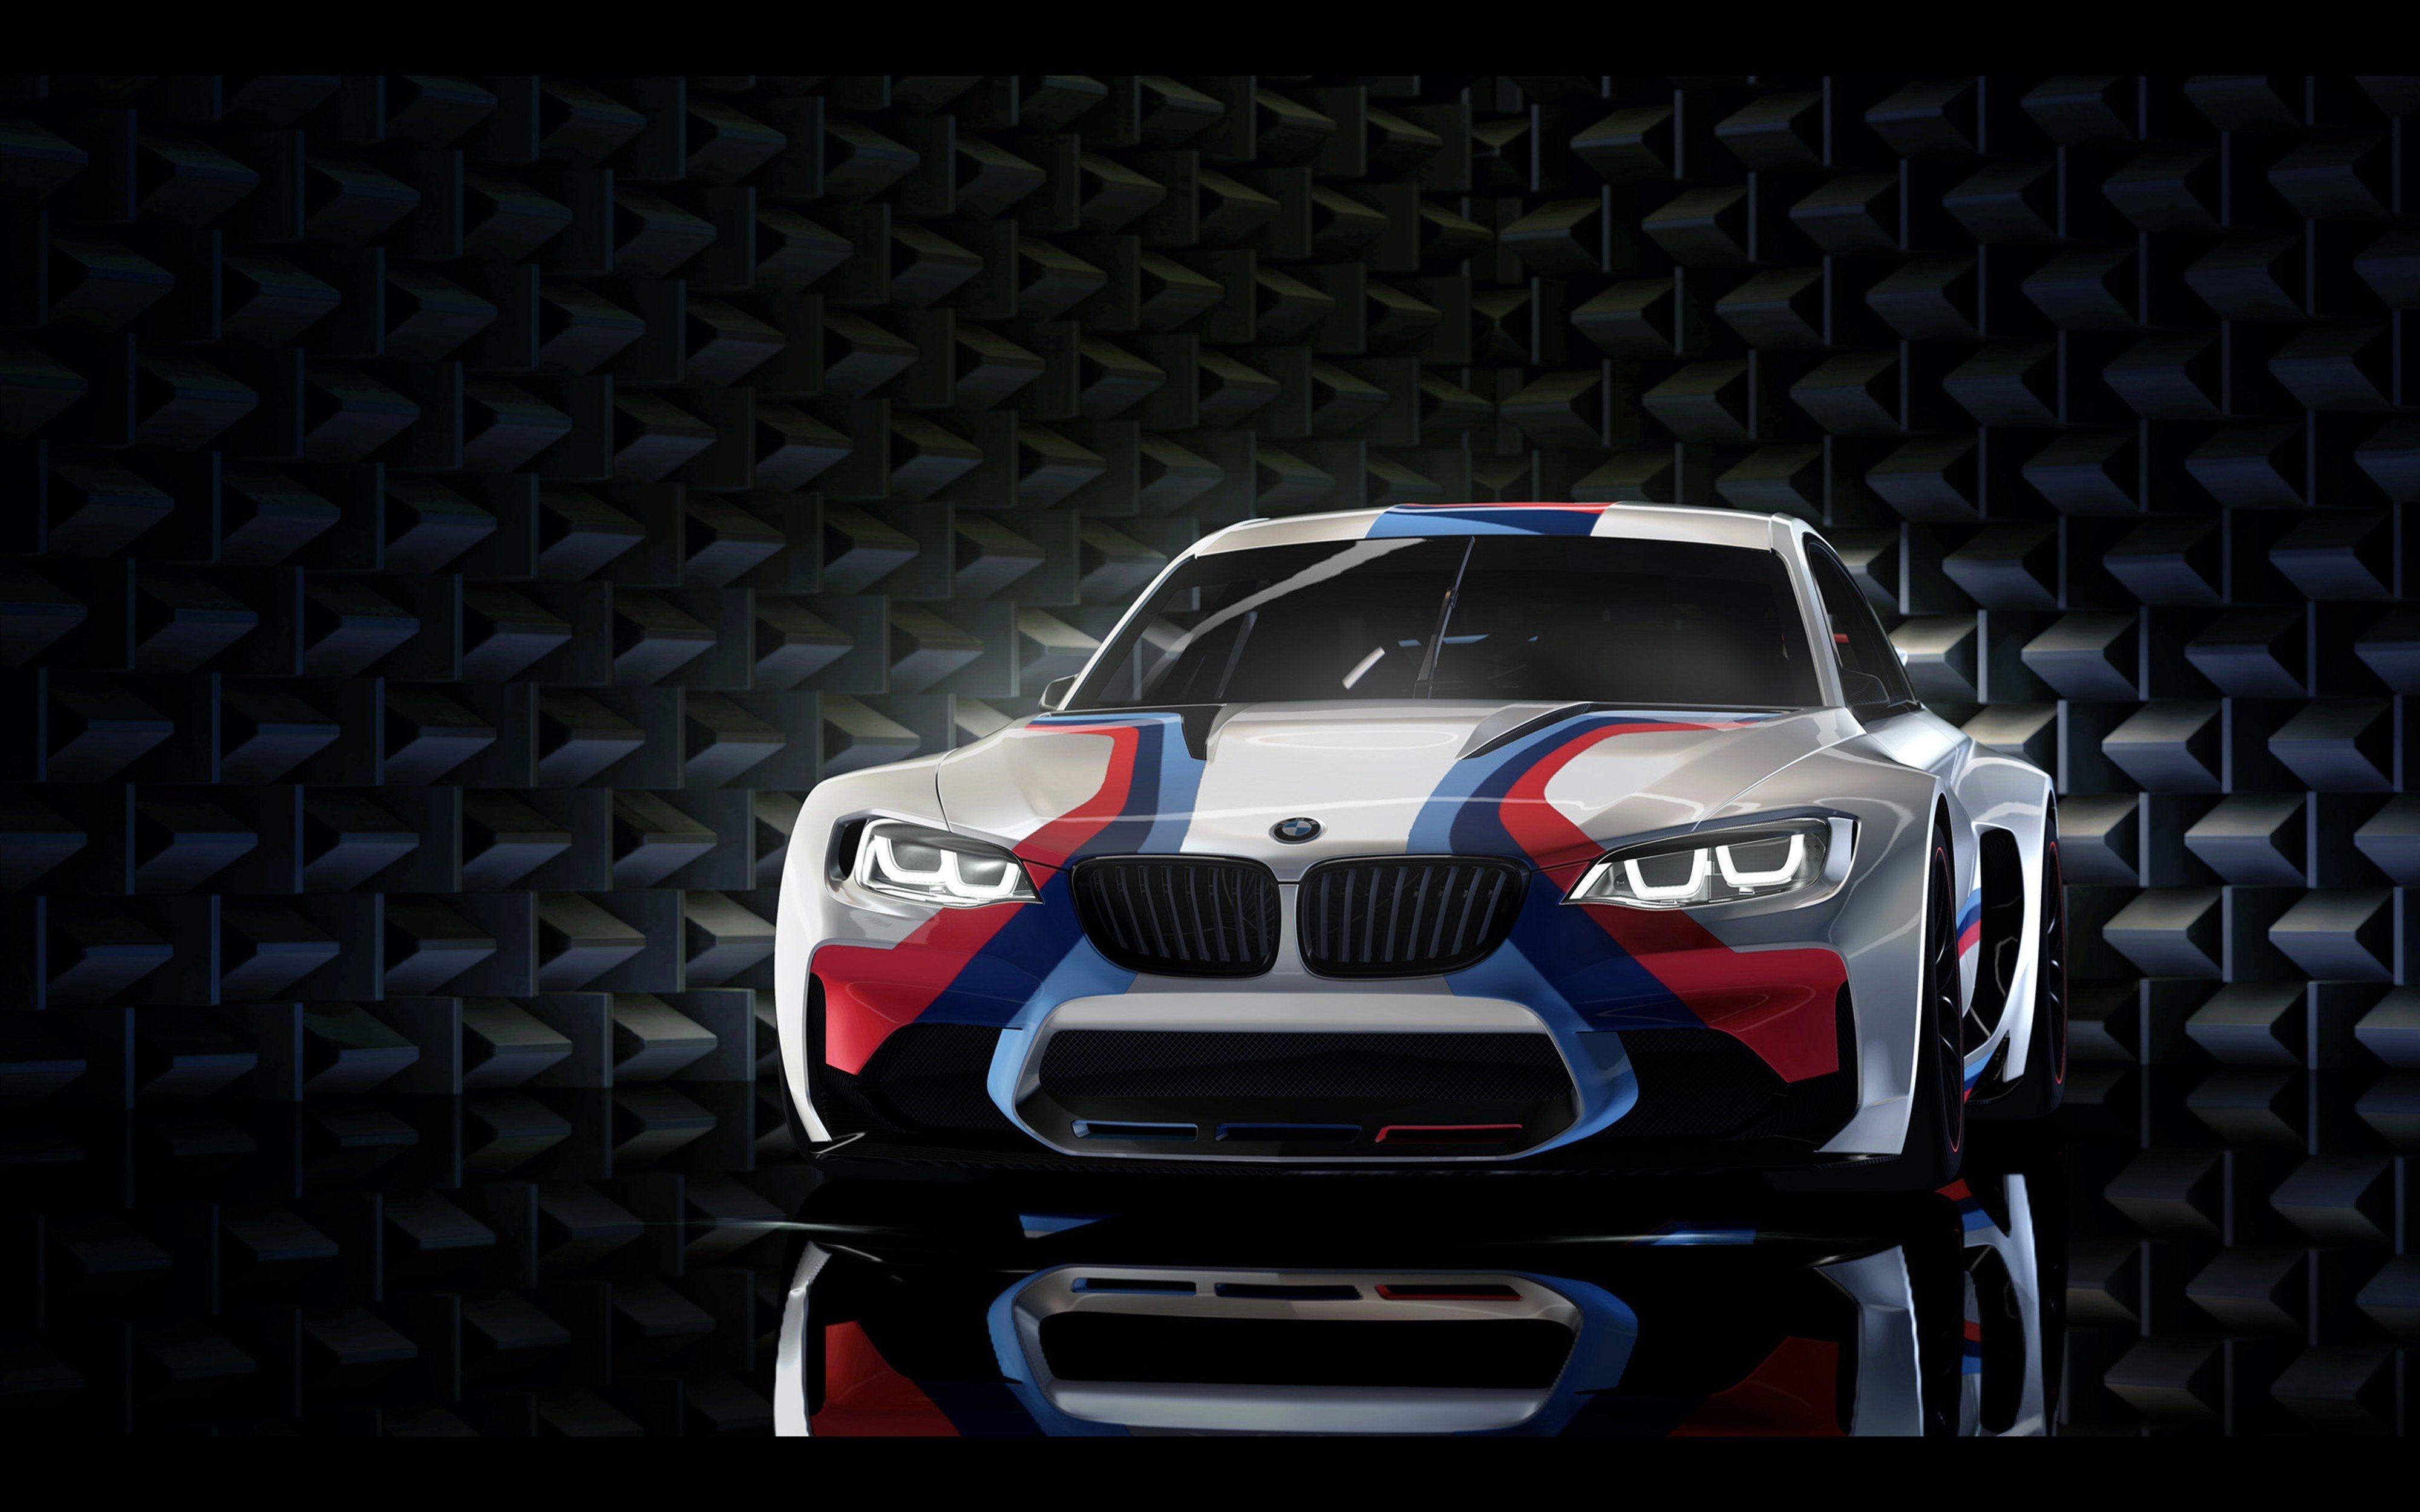 2014, Bmw, Vision, Gran turismo, Concept, Race, Car, Game, Vehicle, Racing, Germany, 4000x2500,  2 Wallpaper